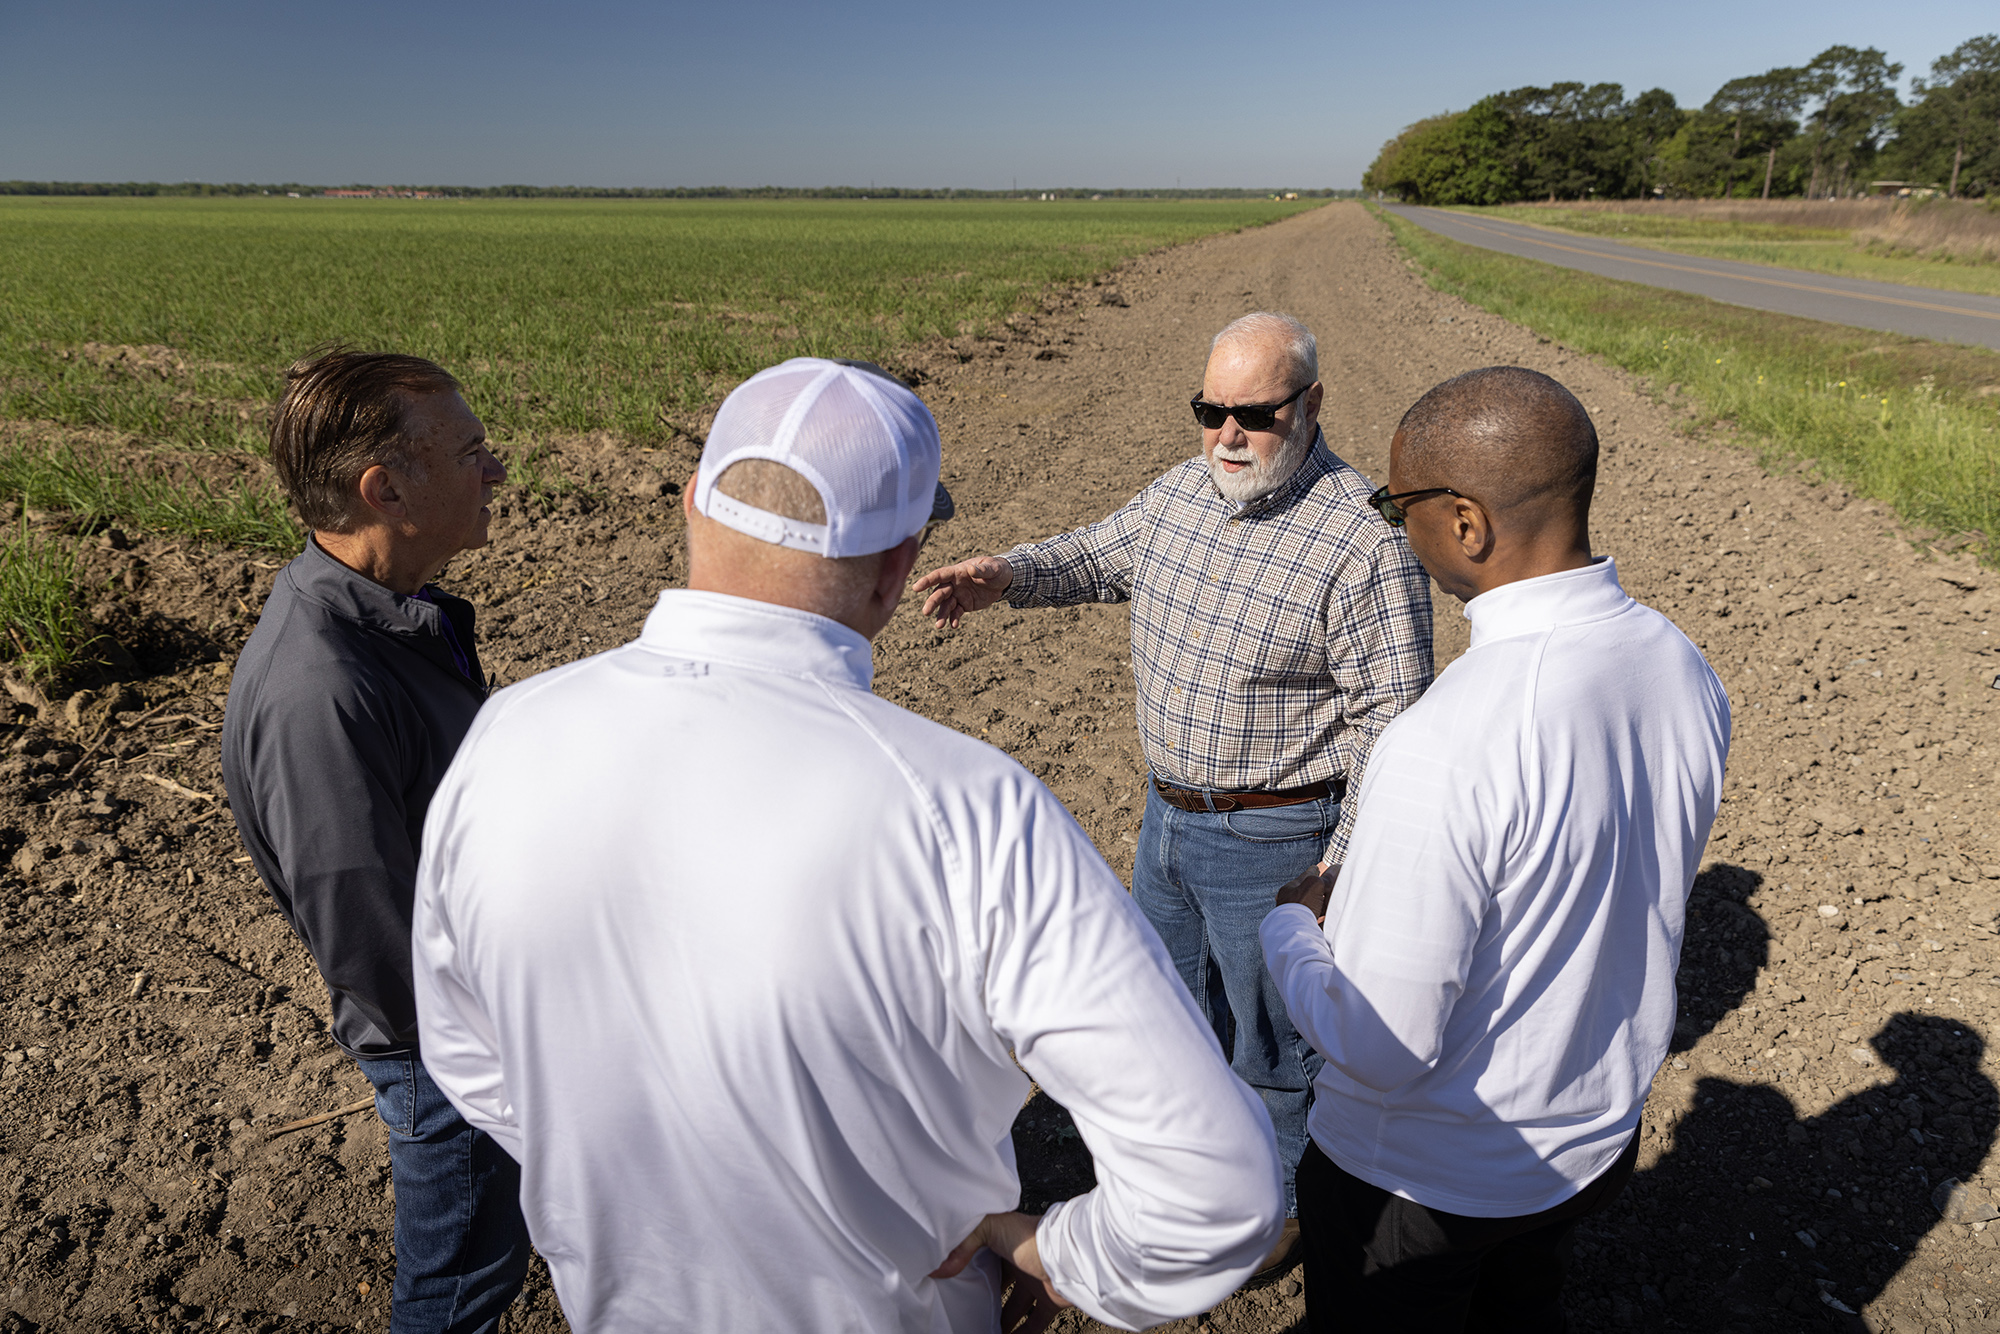 President Tate and three other men stand at the edge of a sugar cane field